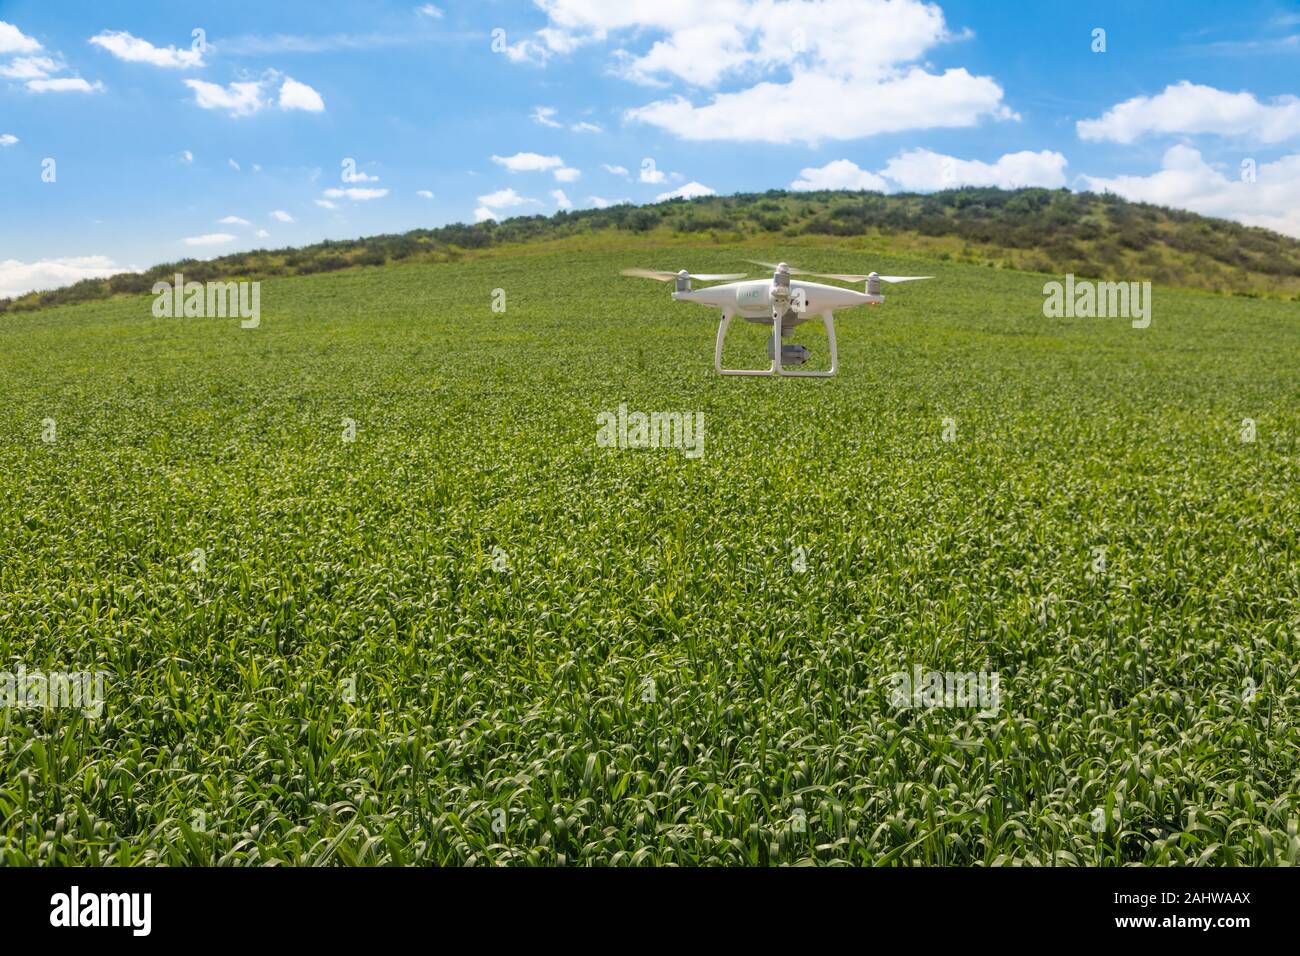 Drone Unmanned Aircraft Flying and Gathering Data Over Country Farmland. Stock Photo